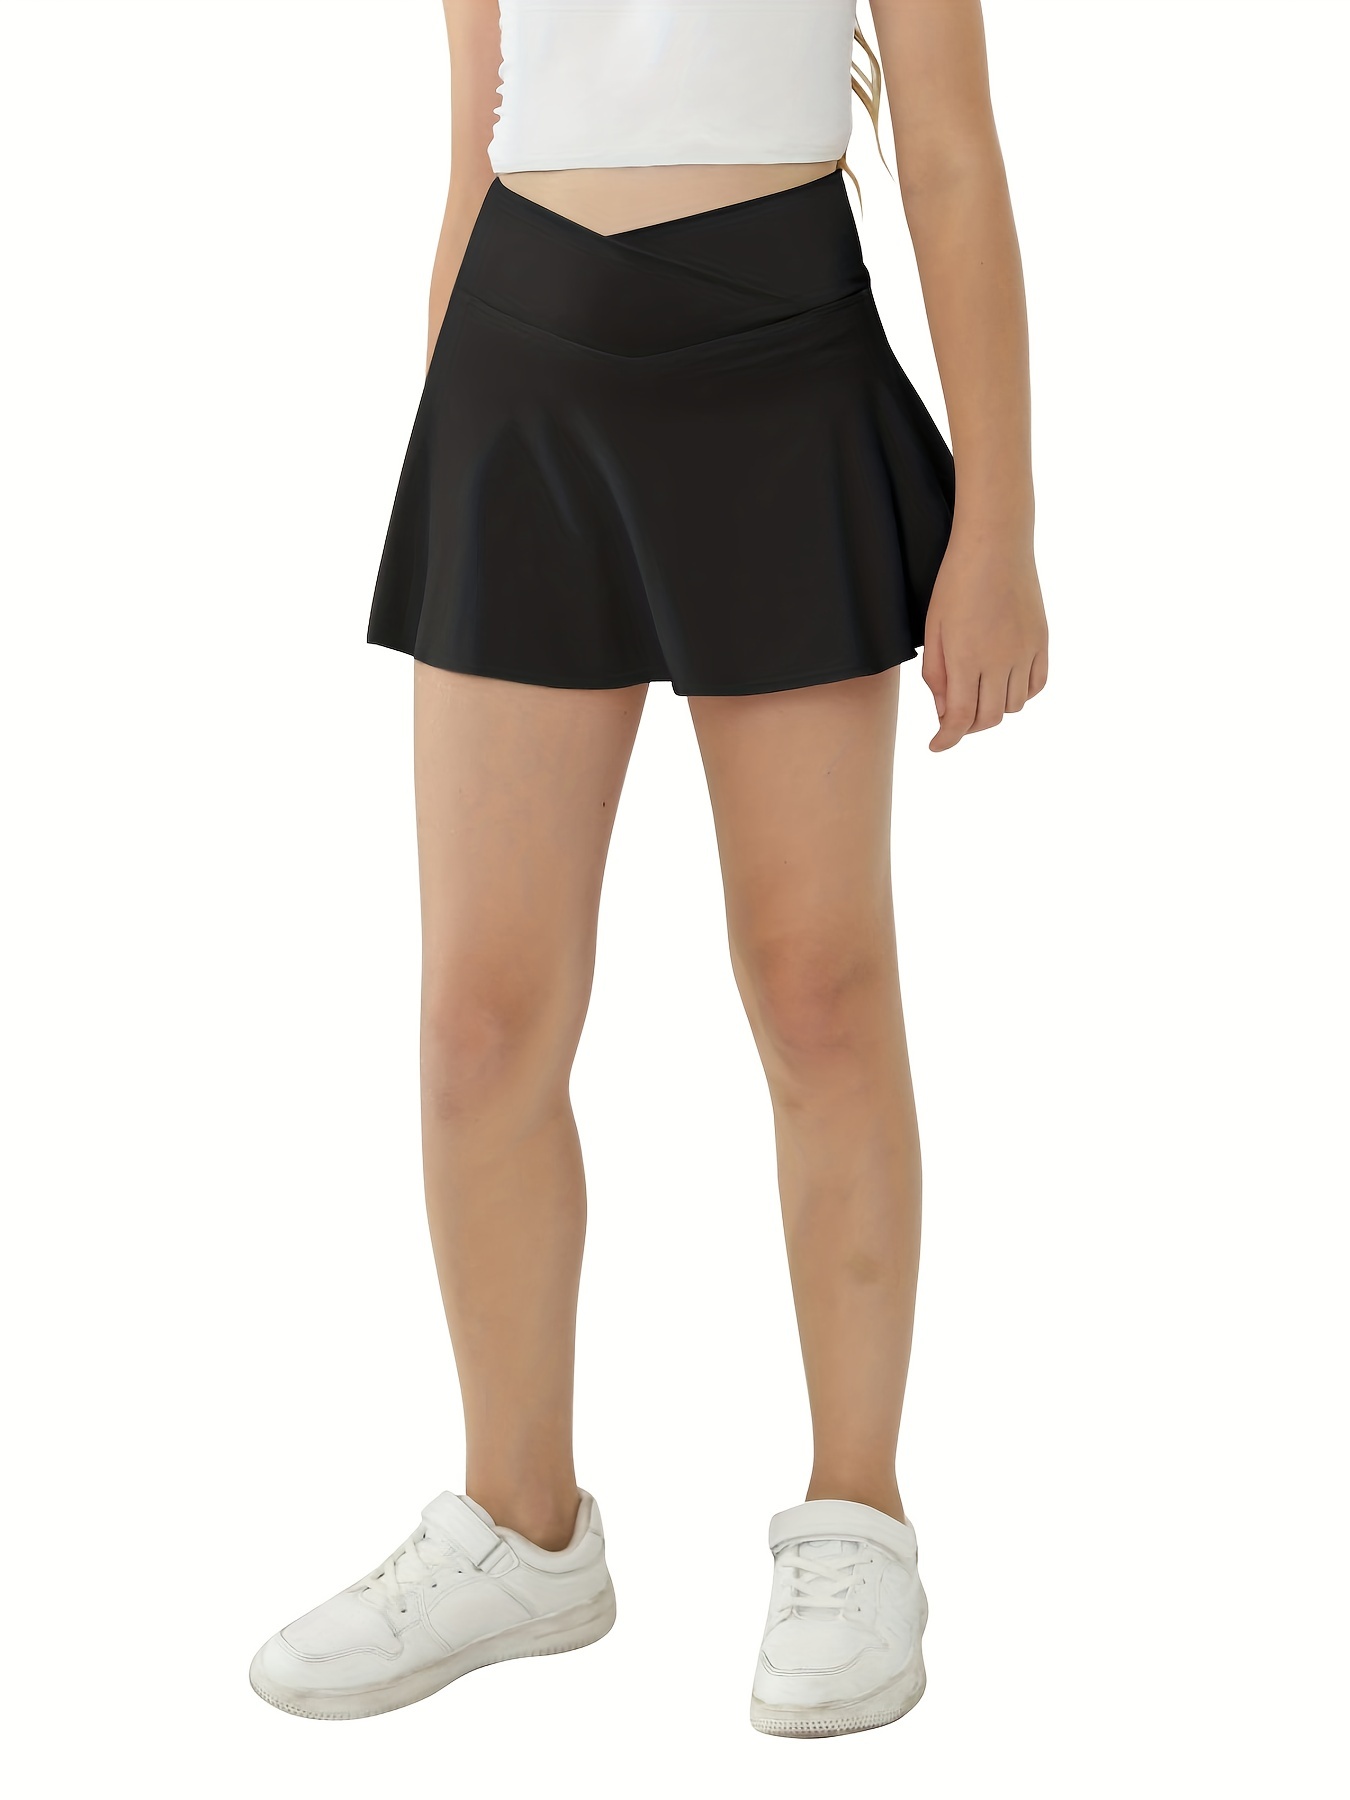 Tennis Skirt for Women with Shorts Golf Skort High Waisted Workout Athletic  Skorts Skirts with Pockets